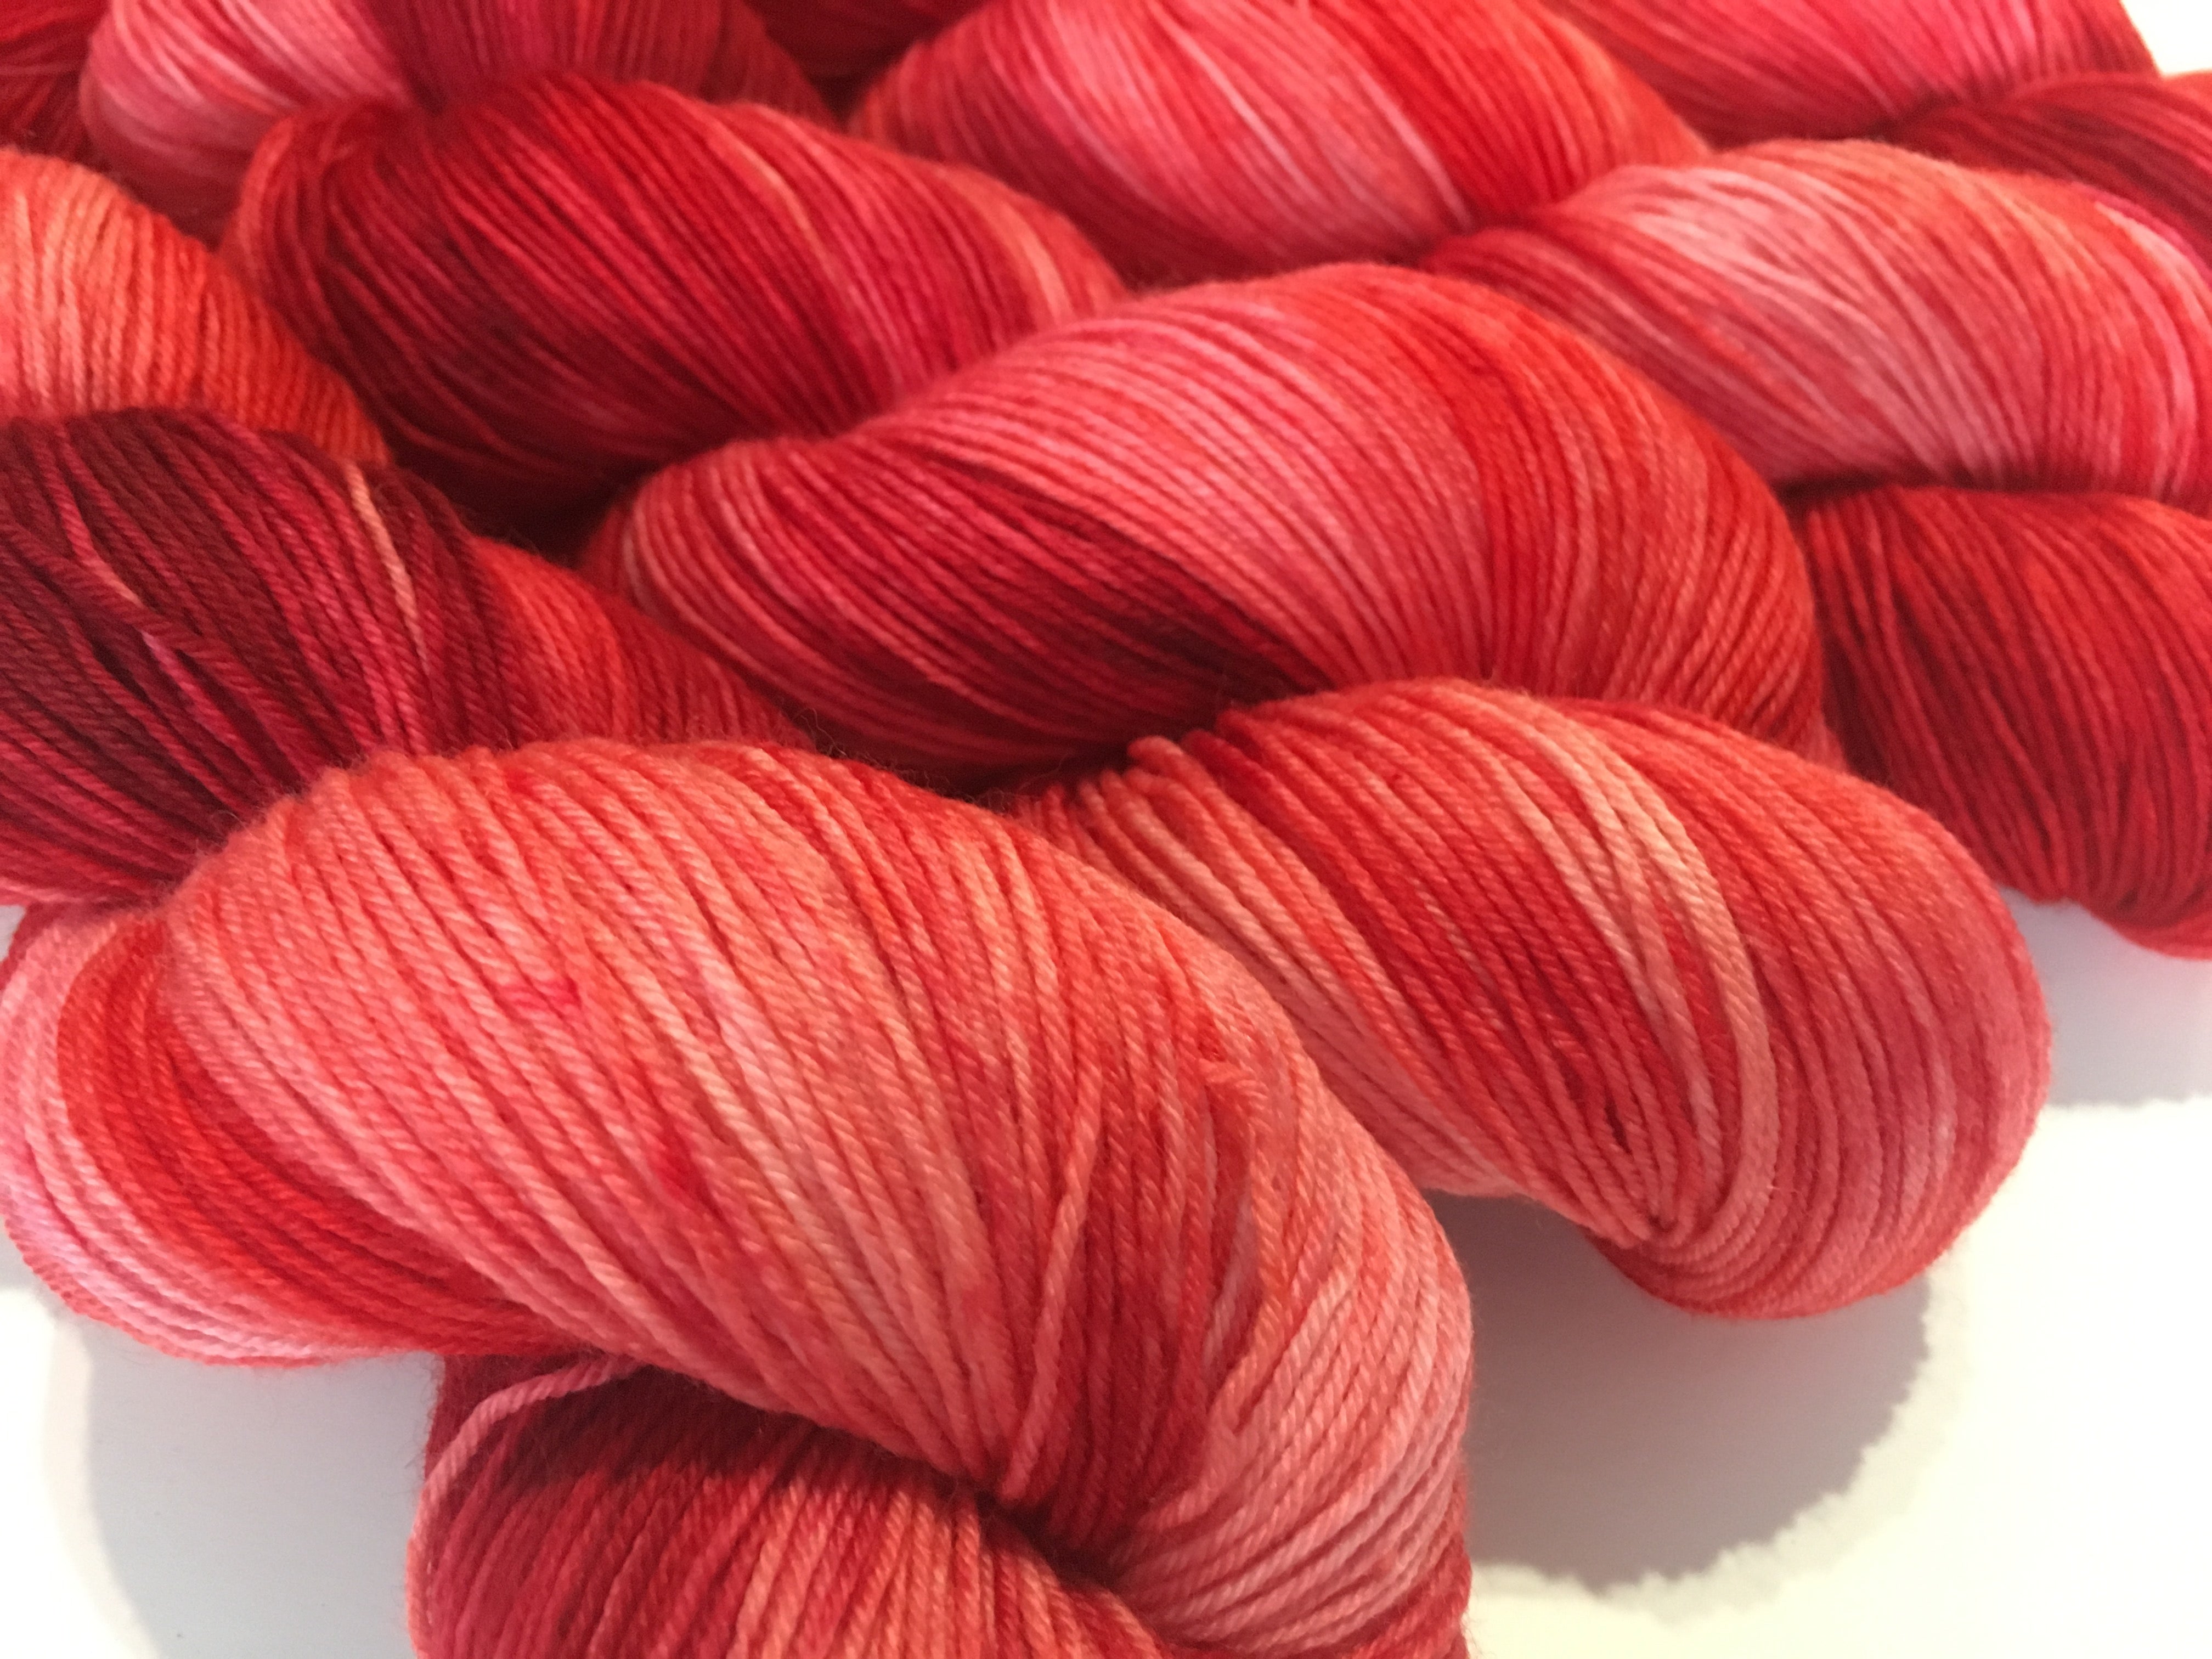 kettle dyed tonal red yarn inspired by the hungry caterpillar